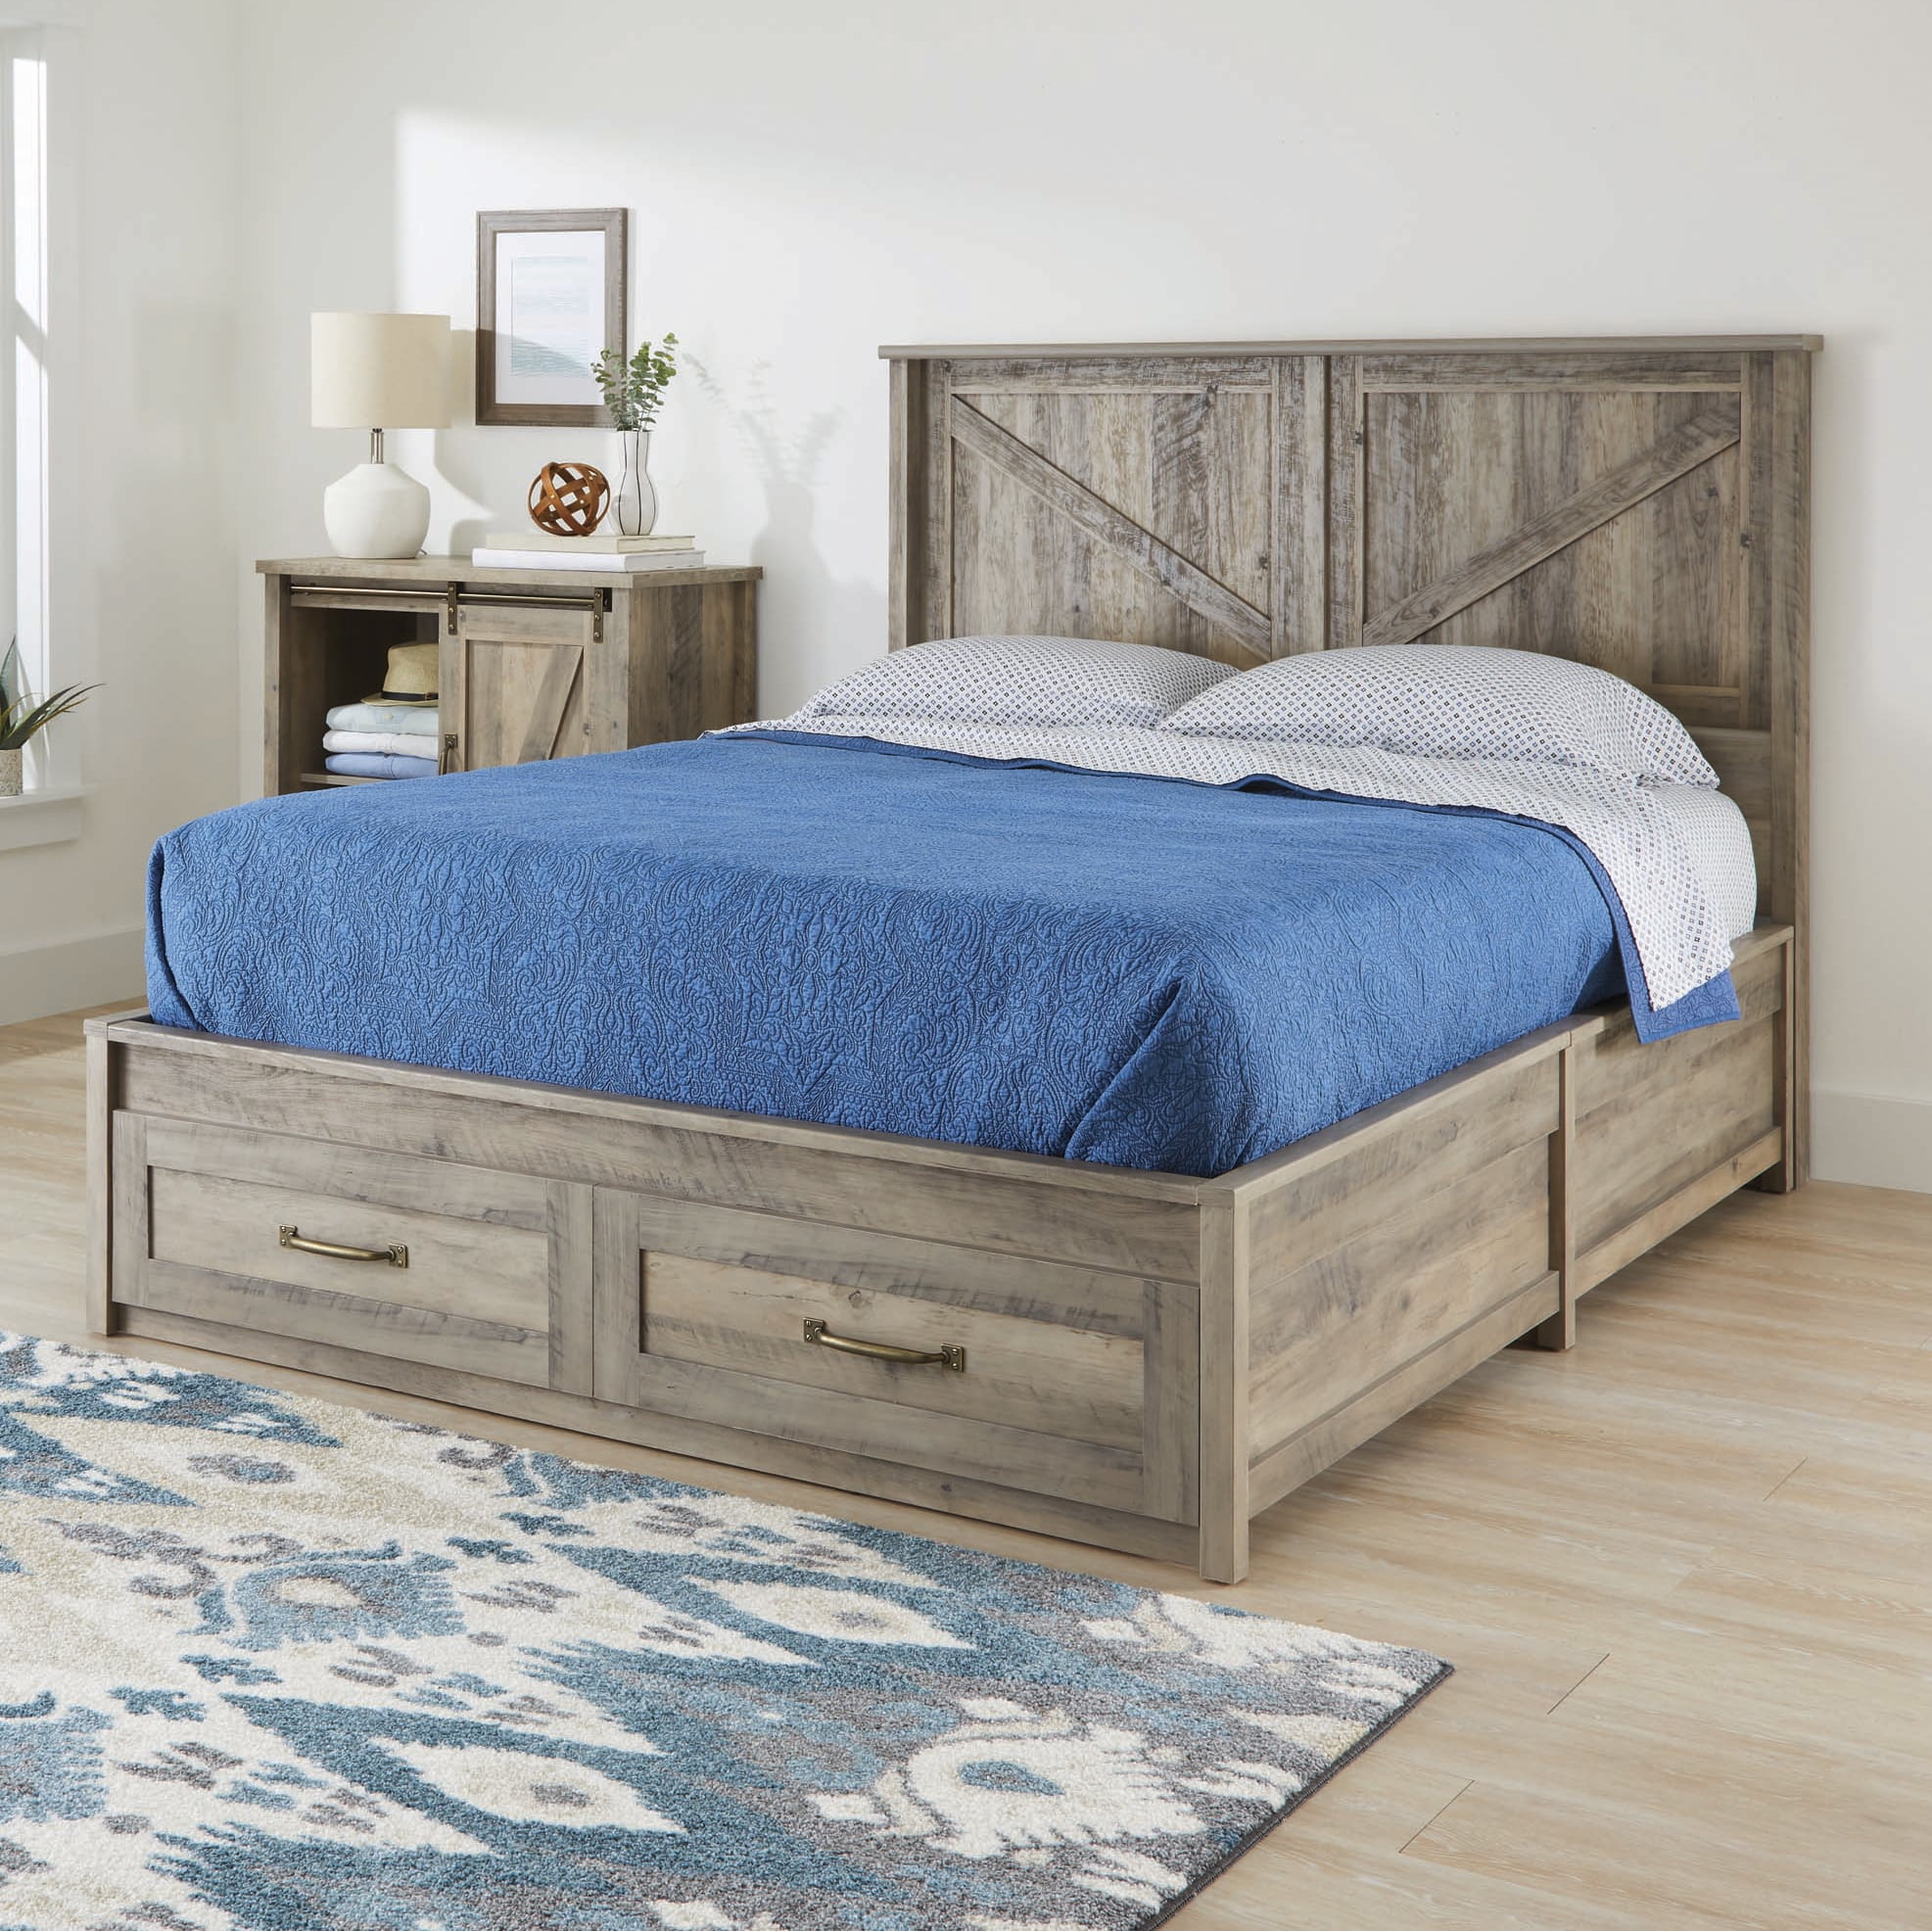 Rustic Wood Headboard With Storage Shelf For Queen or Full Size Bed Frame 